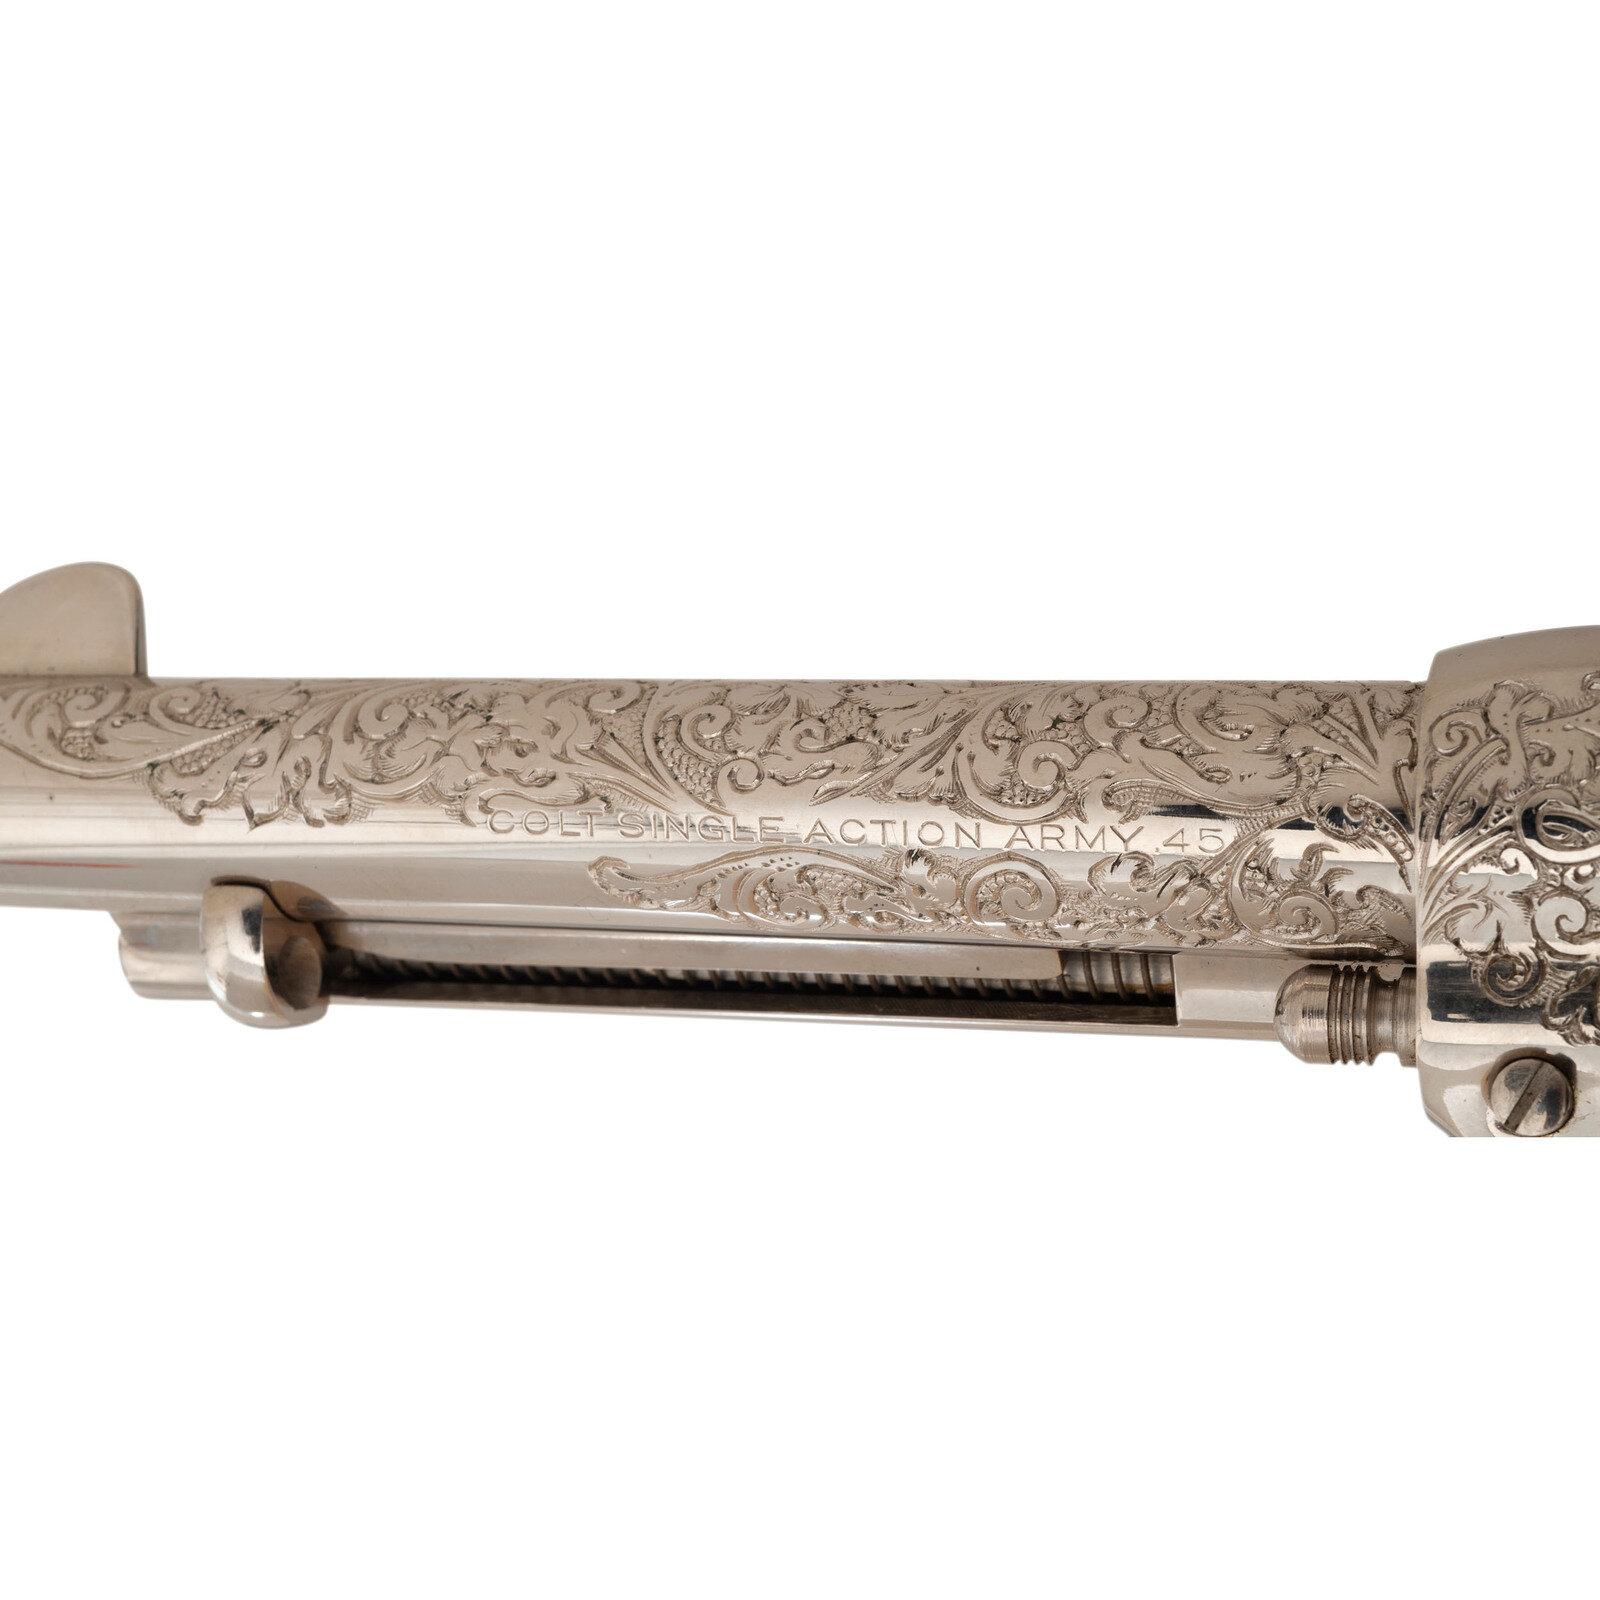 **Engraved 2nd Generation Colt Single Action Army Revolver with Mother of Pearl Grips in Factory Box